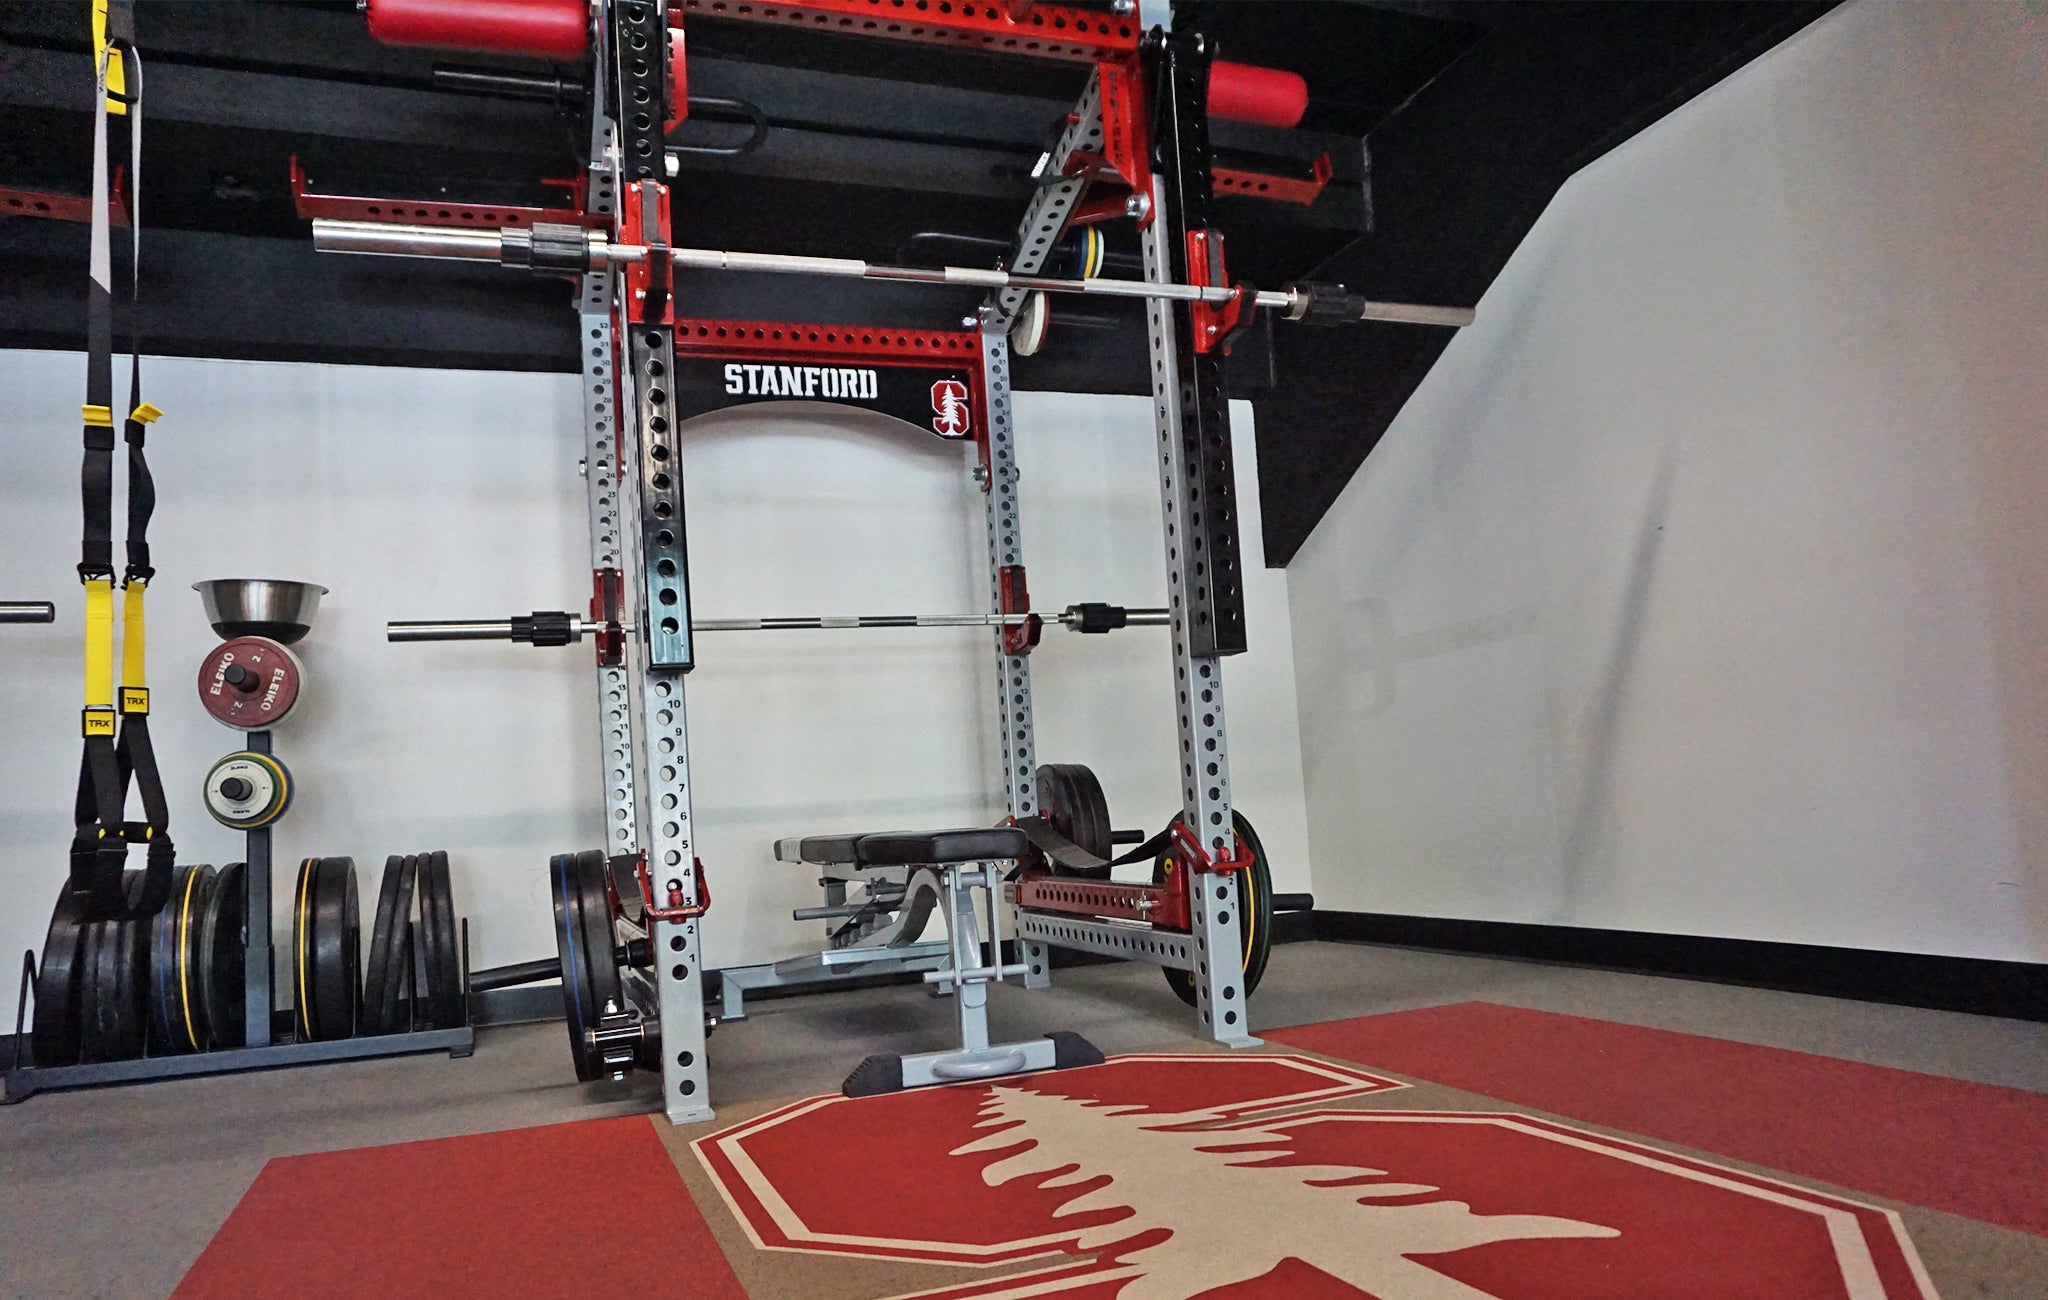 Stanford University strength and conditioning